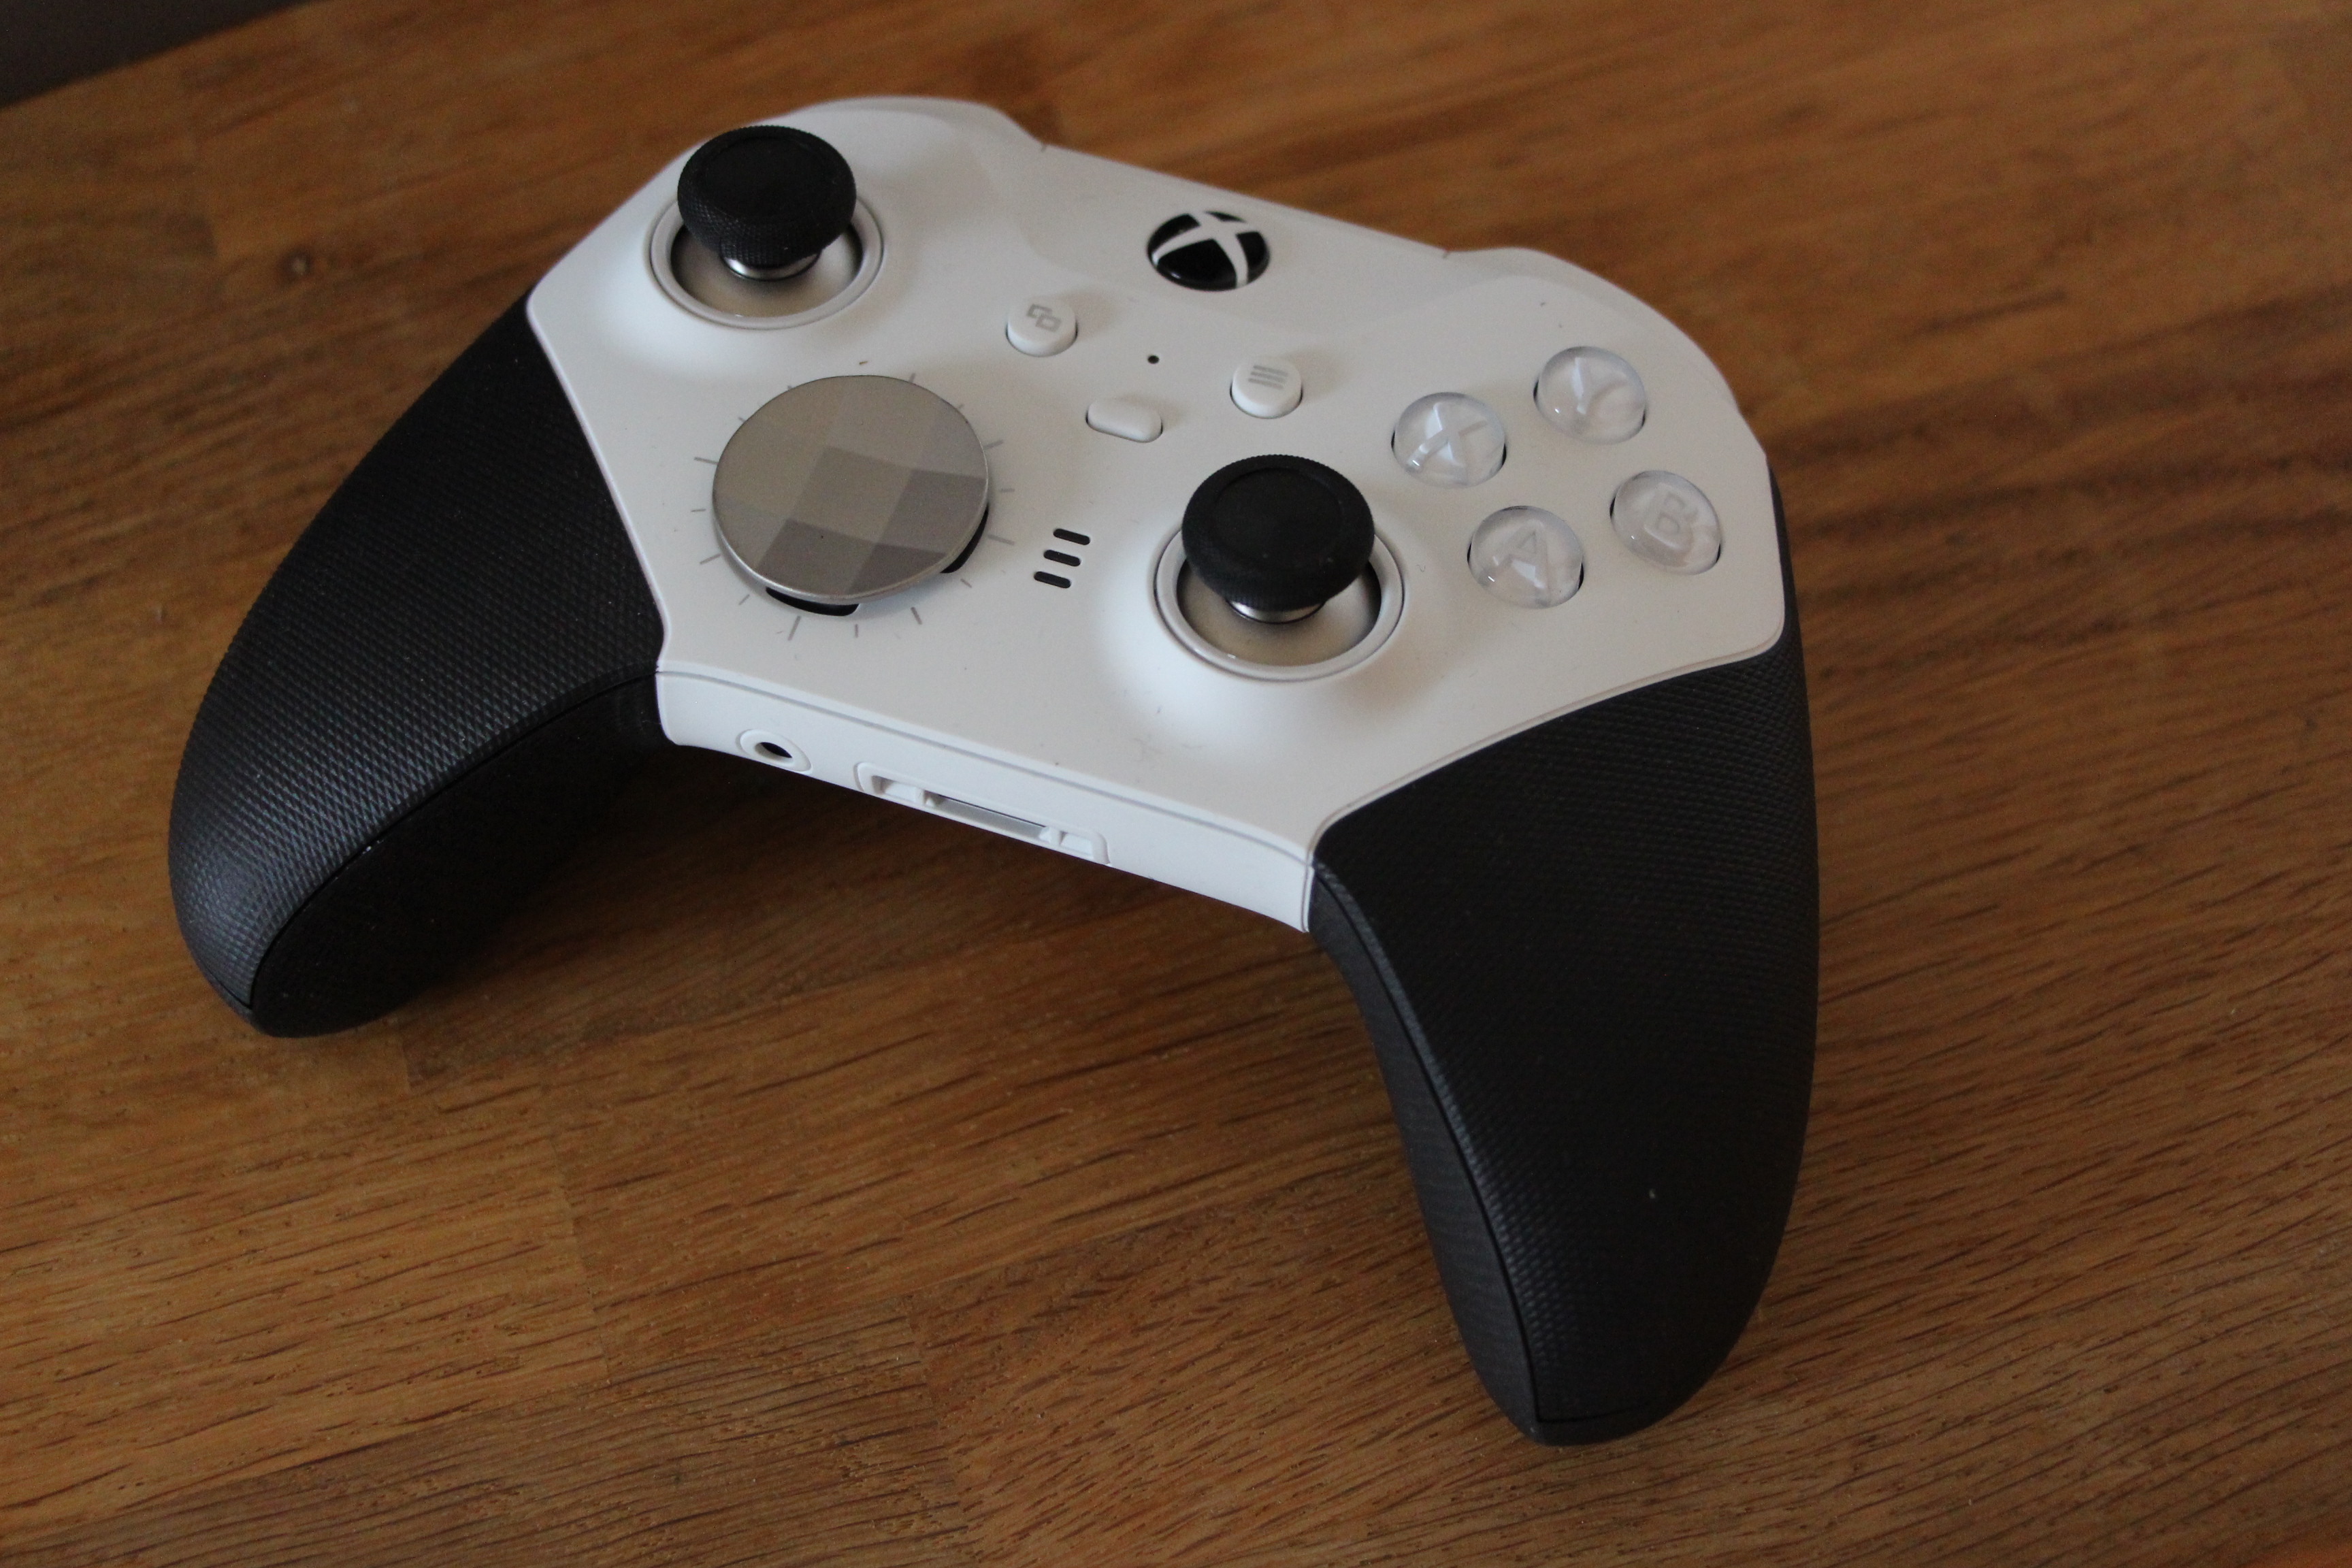 I wish \'Core\' a | Xbox had Windows Elite Central machine I Controller review: time 2 Series